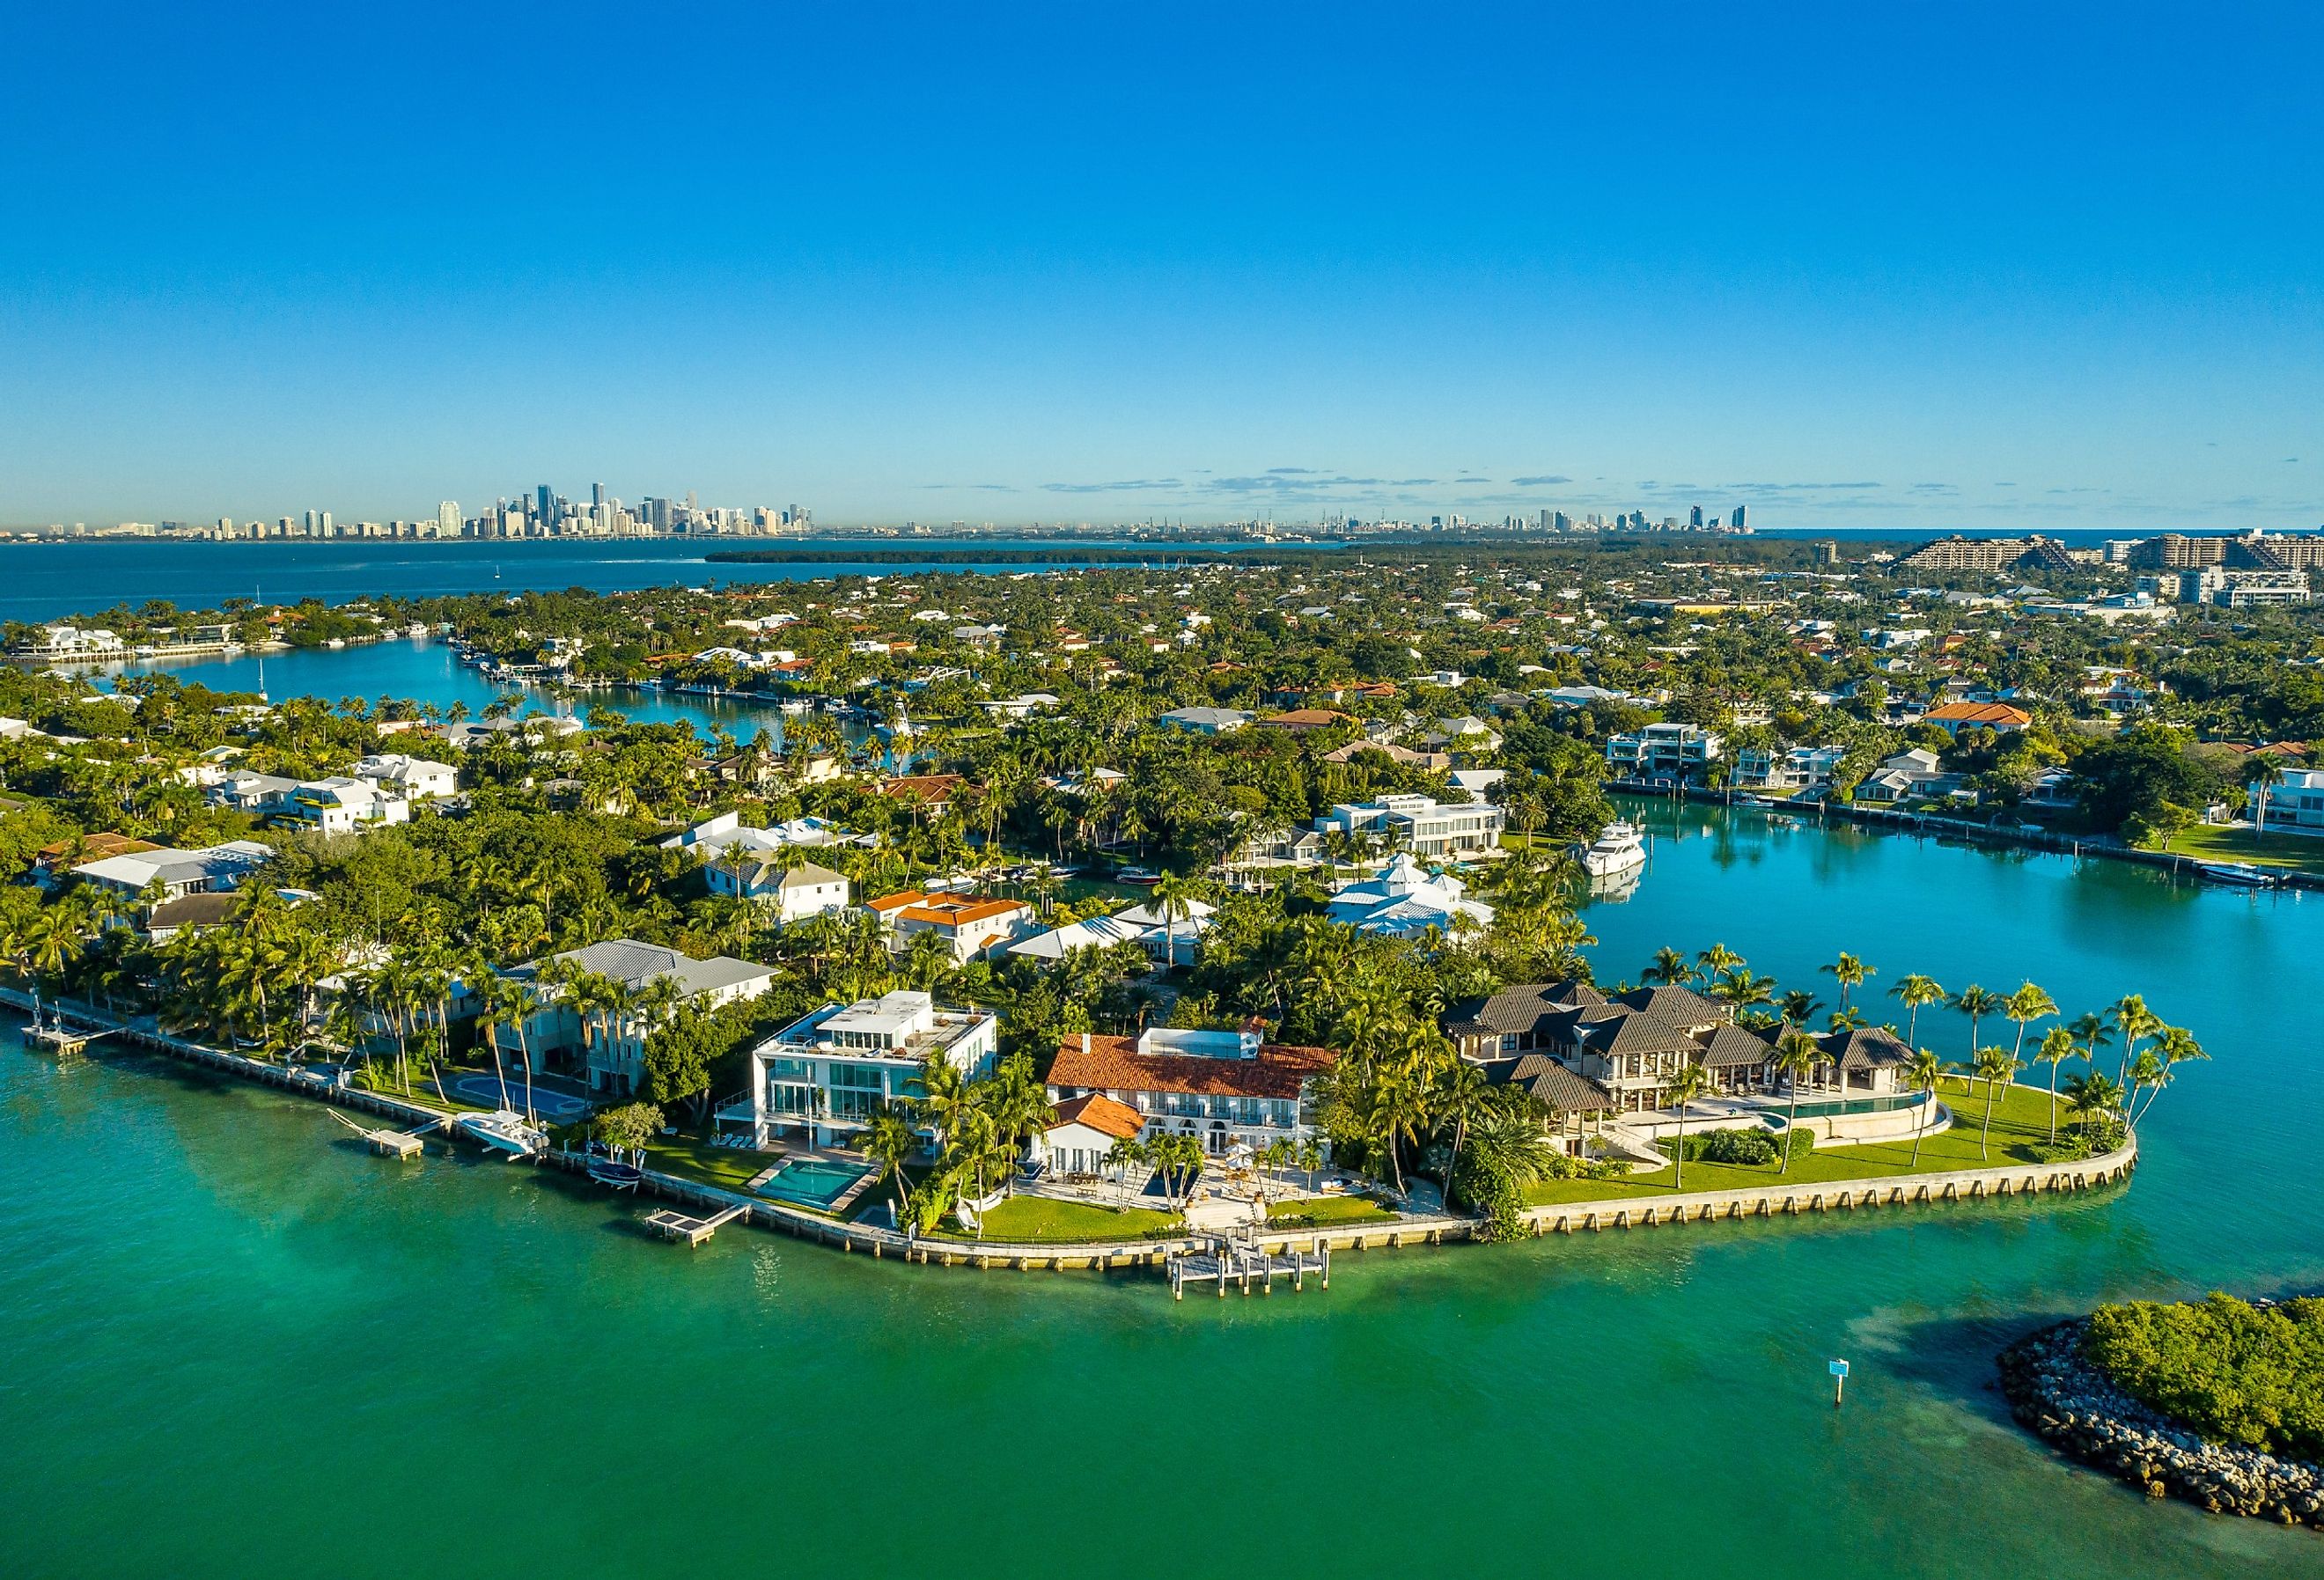 Aerial drone view of wonderful mansions in Key Biscayne, Miami.